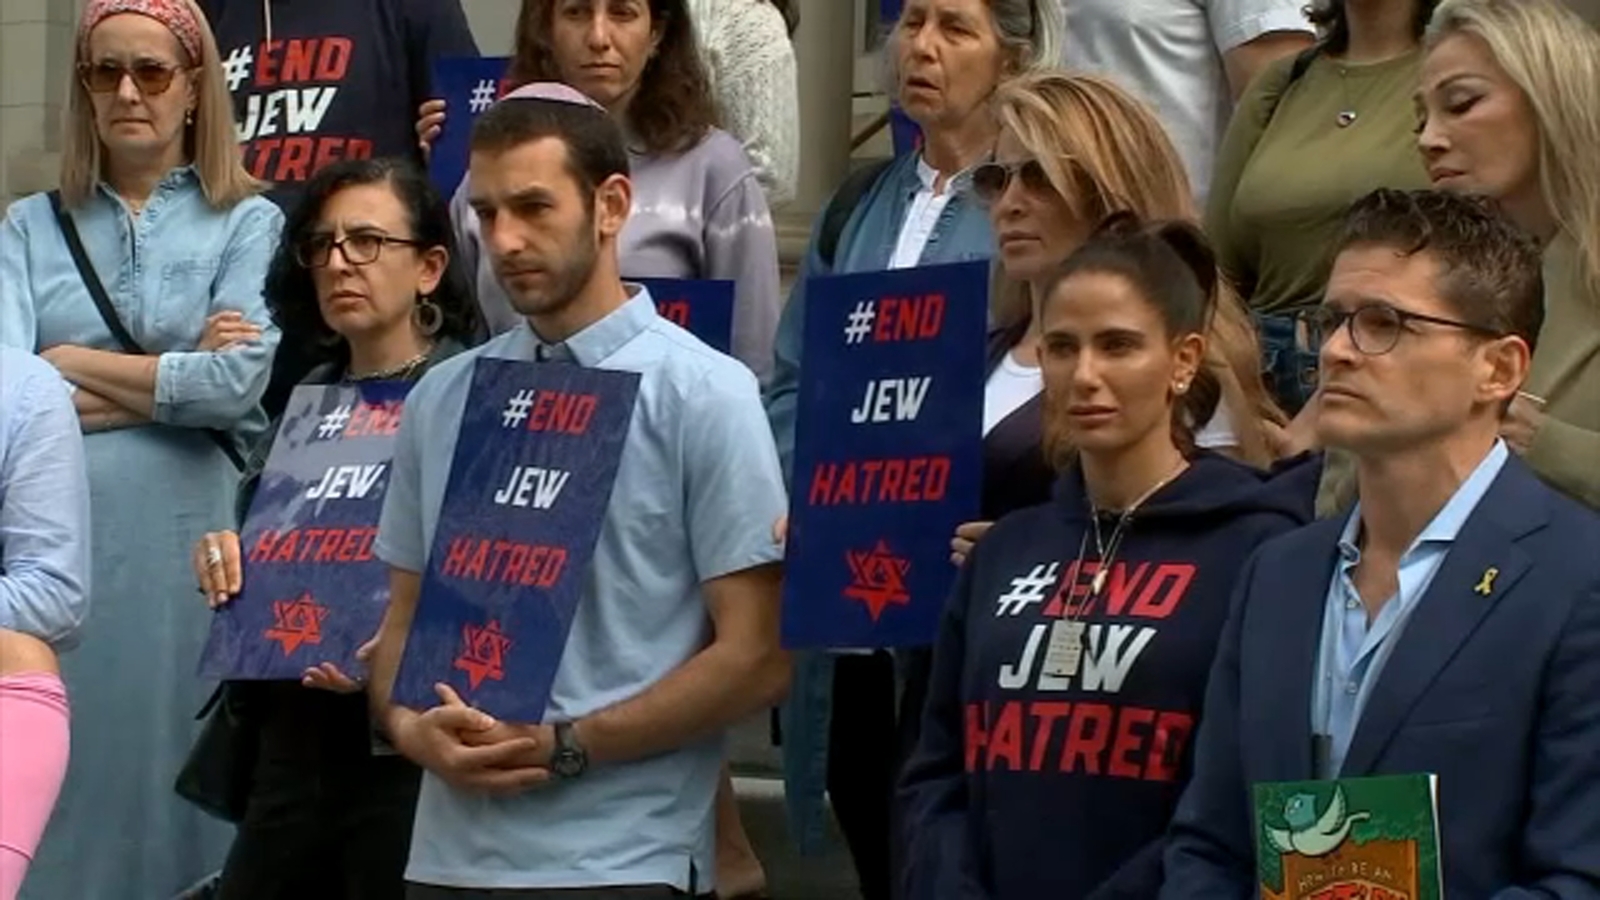 NYC hate-crime rally: Groups gather to demand city takes action against rise of antisemitic attacks [Video]